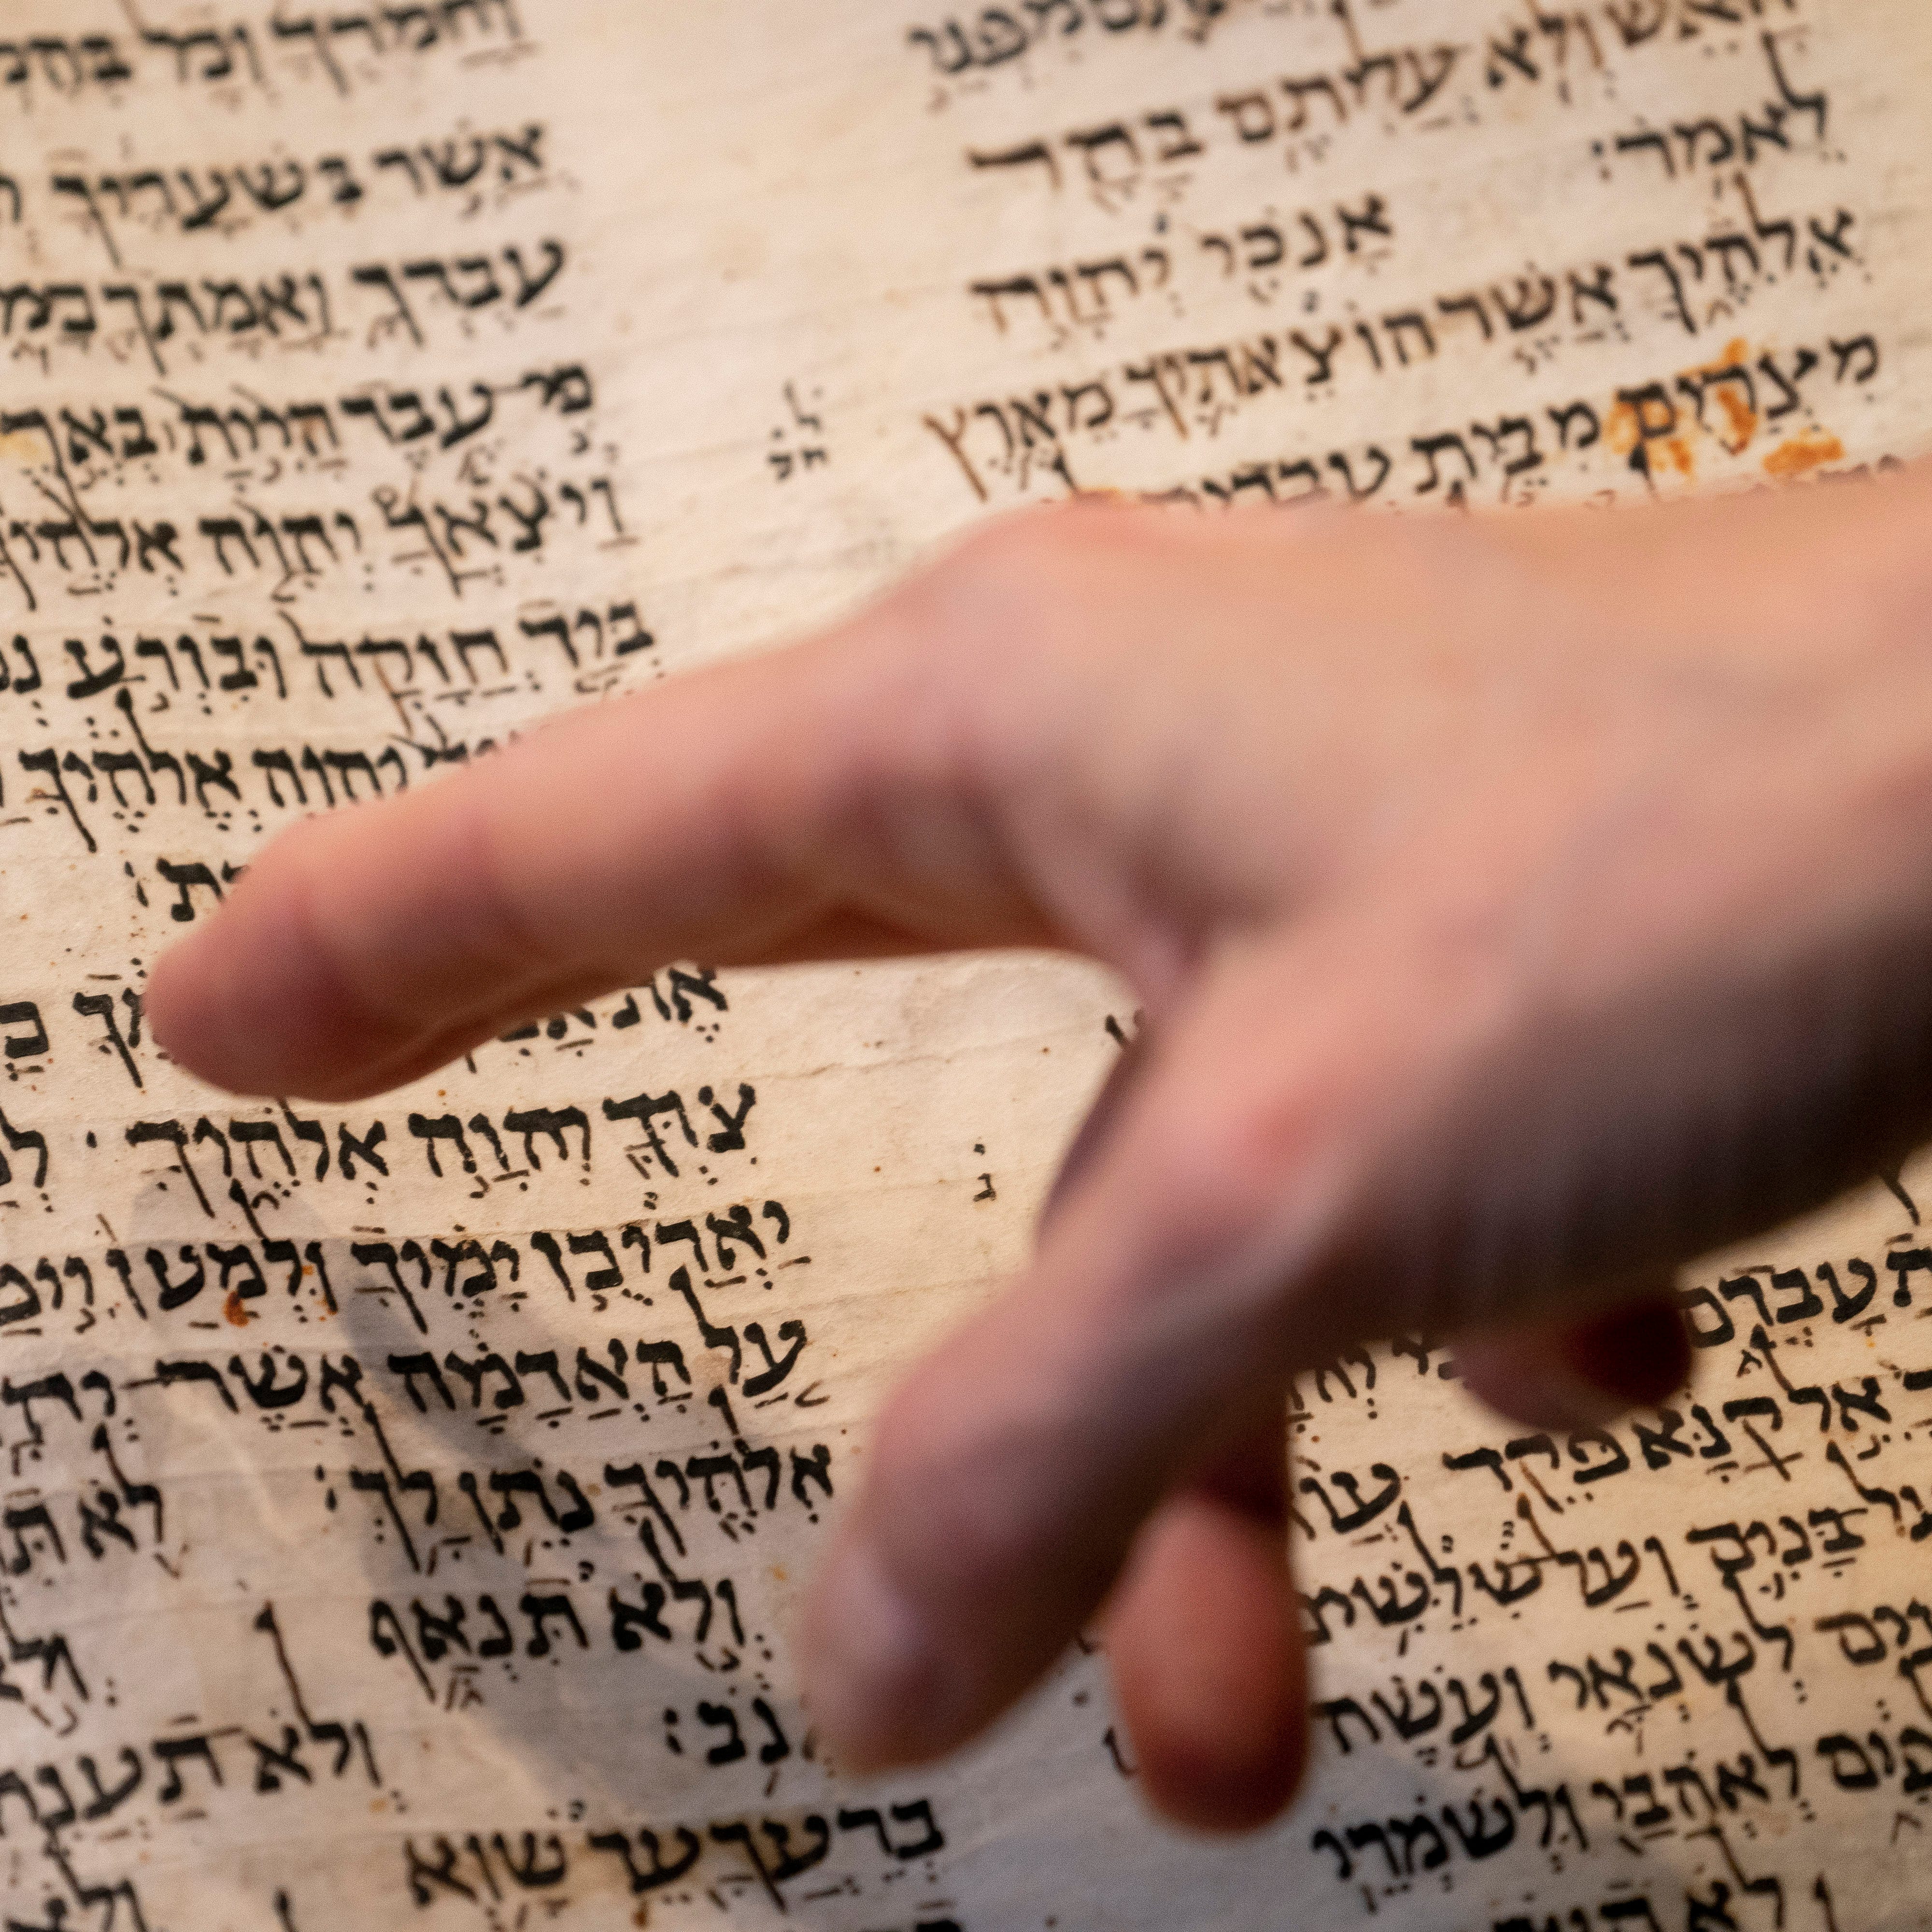 Sotheby's unveils the Codex Sassoon for auction, Wednesday, Feb. 15, 2023, in the Manhattan borough of New York. The 1,100-year-old Hebrew Bible that is one of the oldest surviving biblical manuscripts sold for $38.1 million, which includes the auction house's fee, Wednesday, May 17, 2023, in New York.